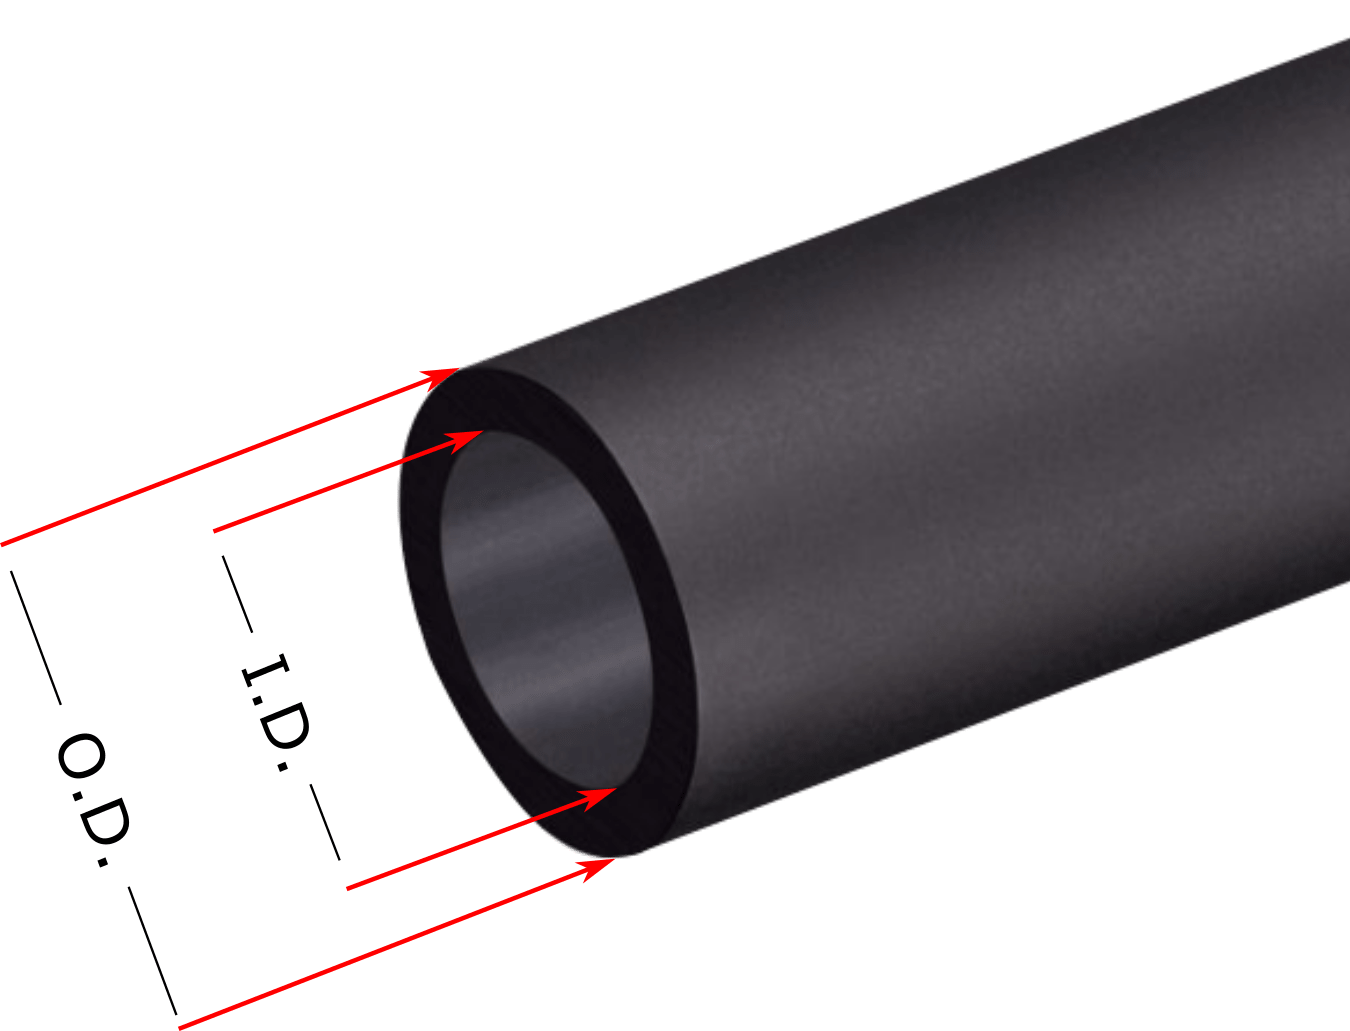 Inside and outside diameters of water-cooling tubing